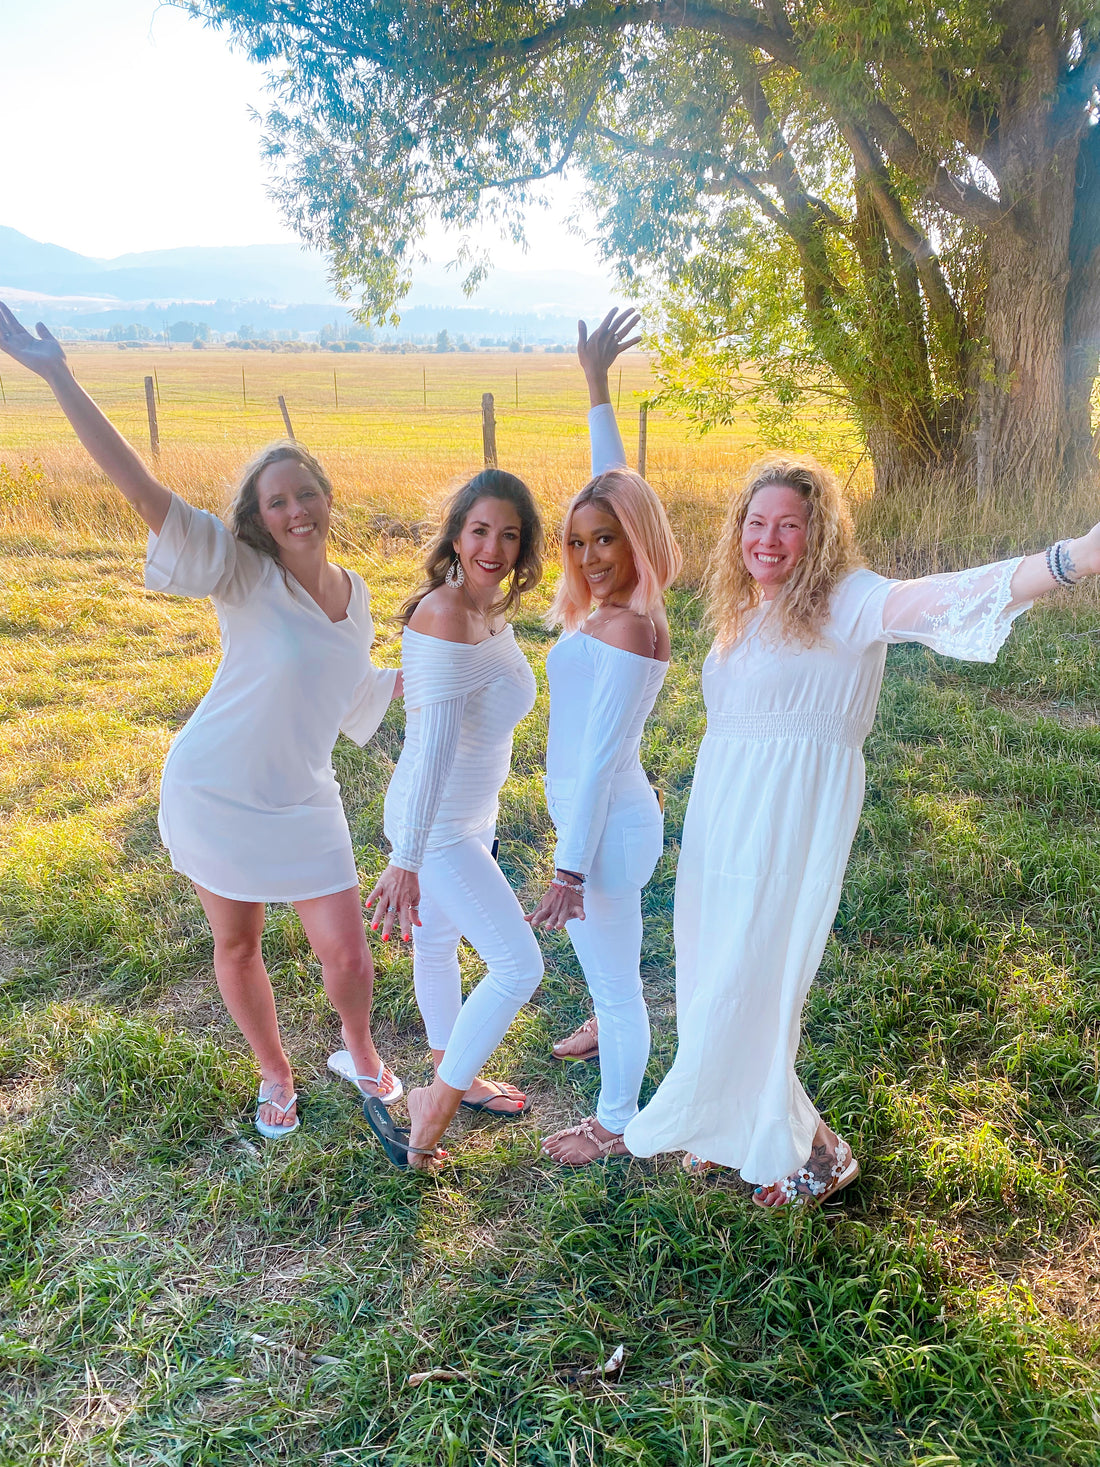 Why We Love Hosting our Women's Wellness Retreat Soul Retreat in California